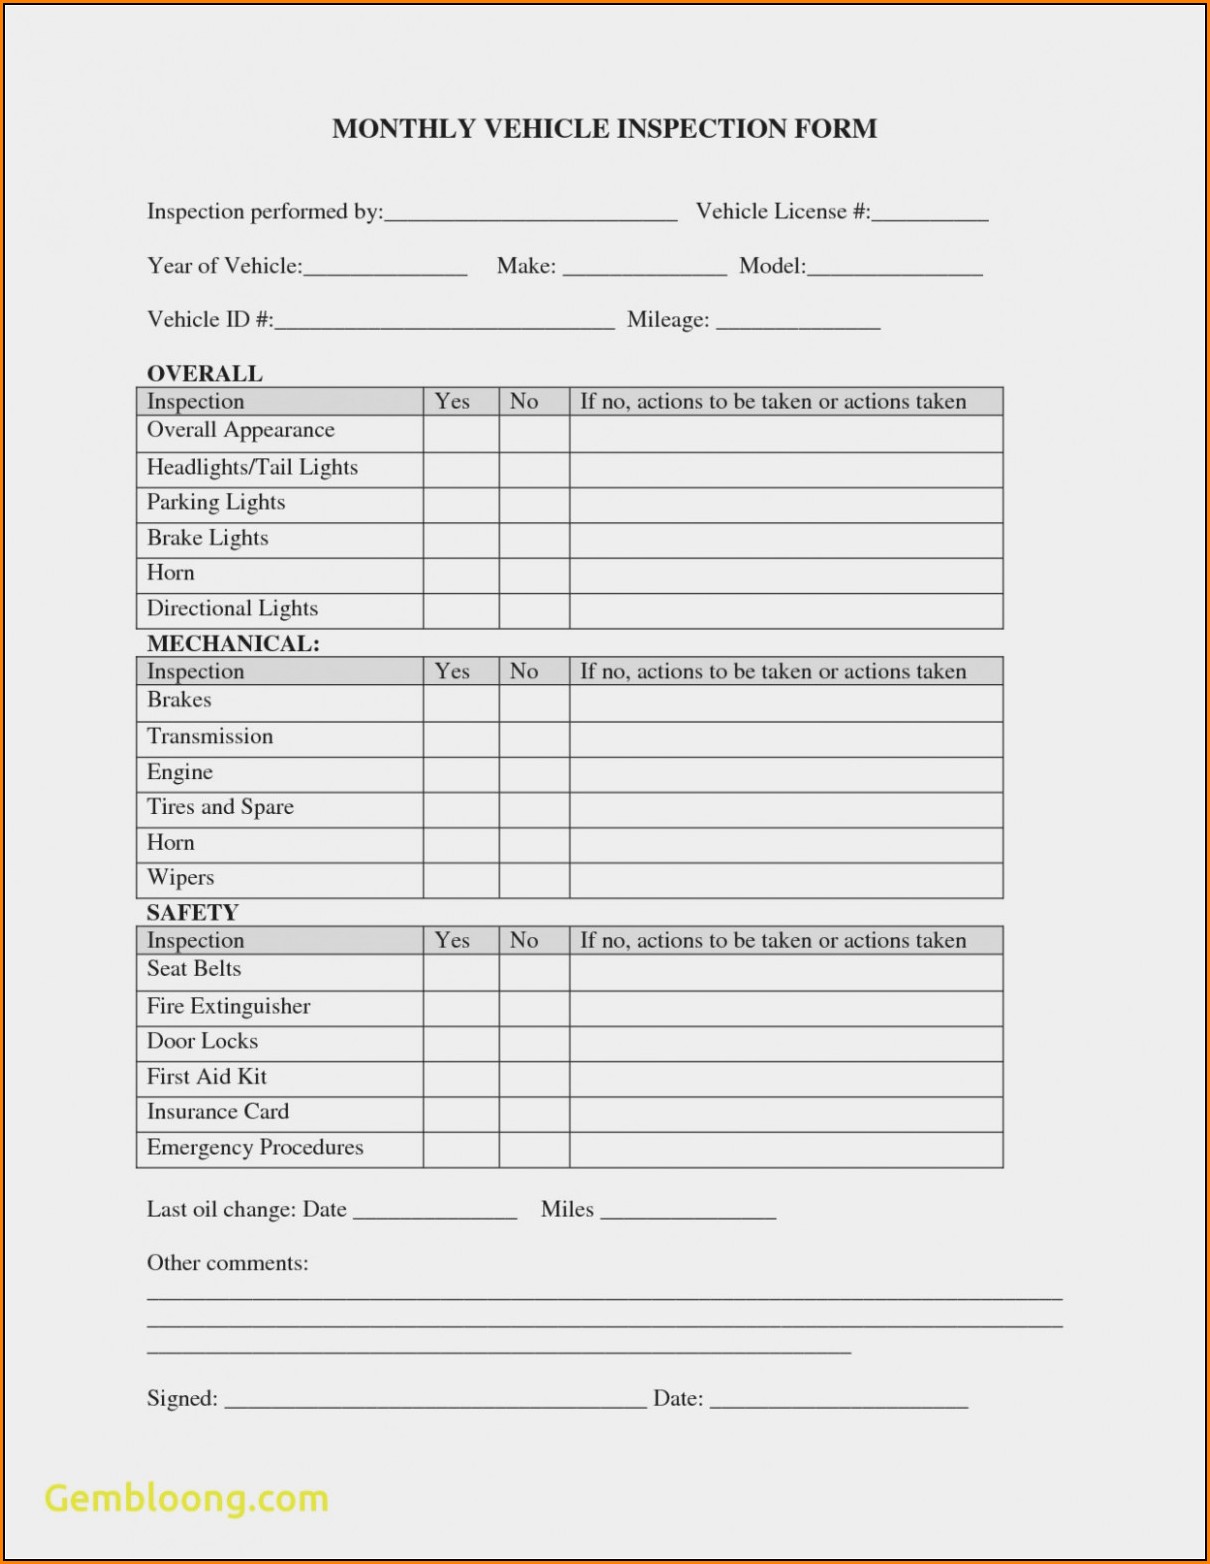 Daily Vehicle Inspection Form Template